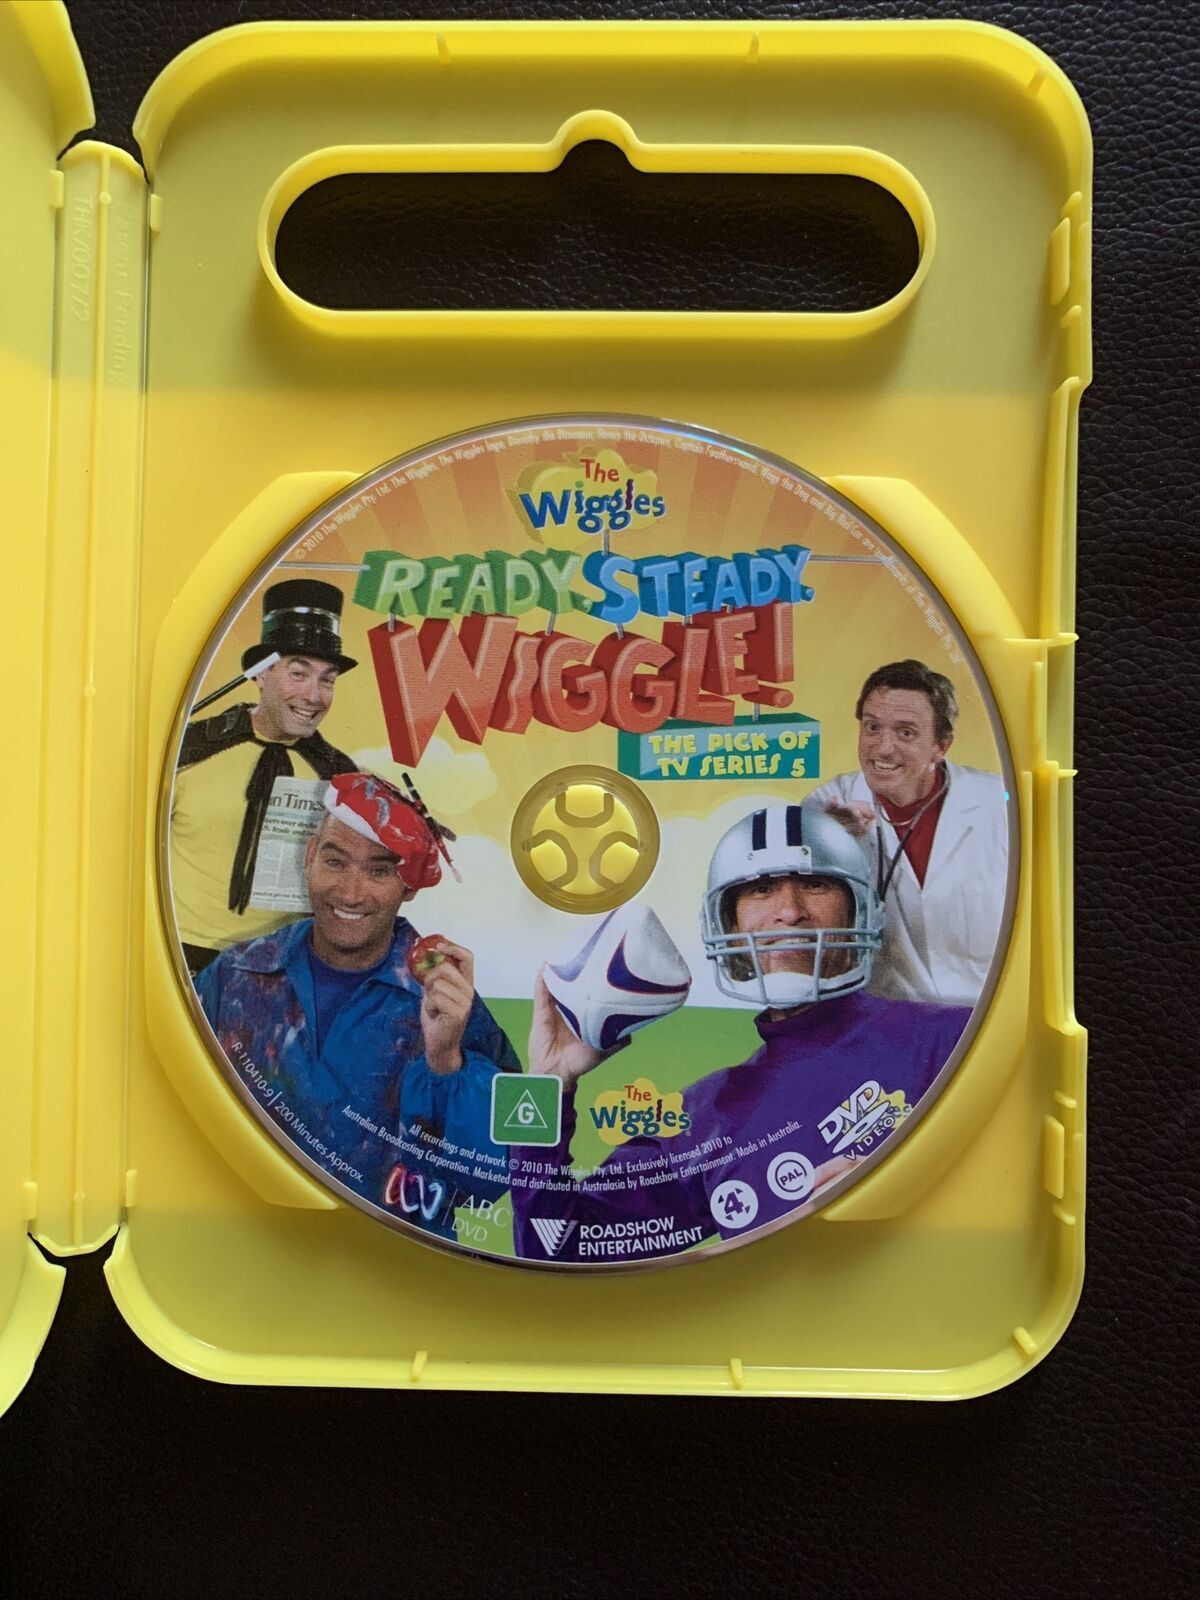 The Wiggles - Ready, Steady, Wiggle! : The Pick Of TV : Series 5 (DVD, 2010)